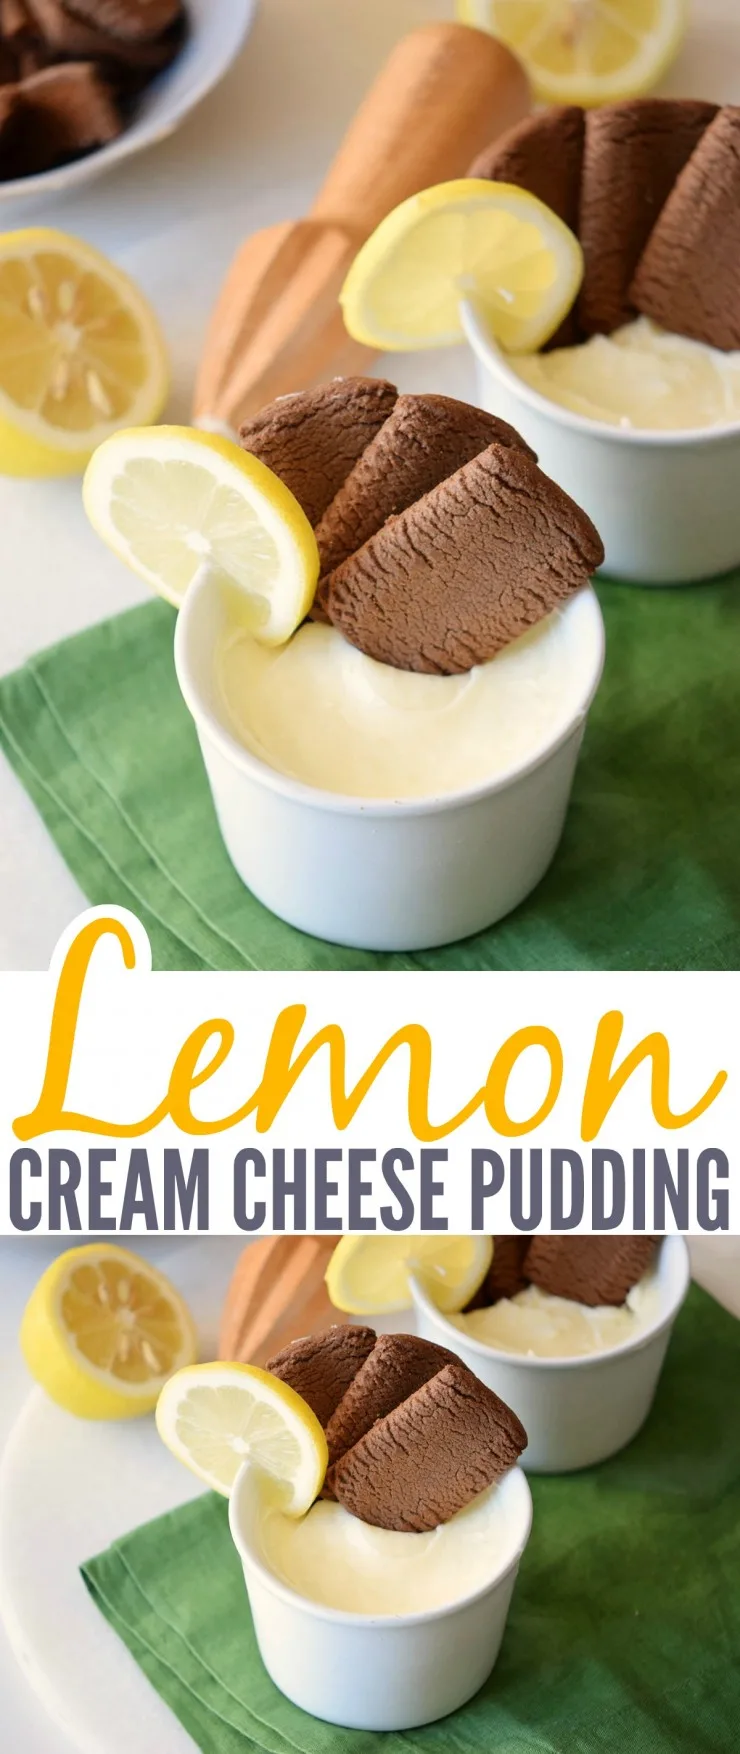 Grab your spoons, and prepare for a pudding indulgence! This Lemon Cream Cheese Pudding is smooth, tangy, light and creamy. This is one dreamy dessert!